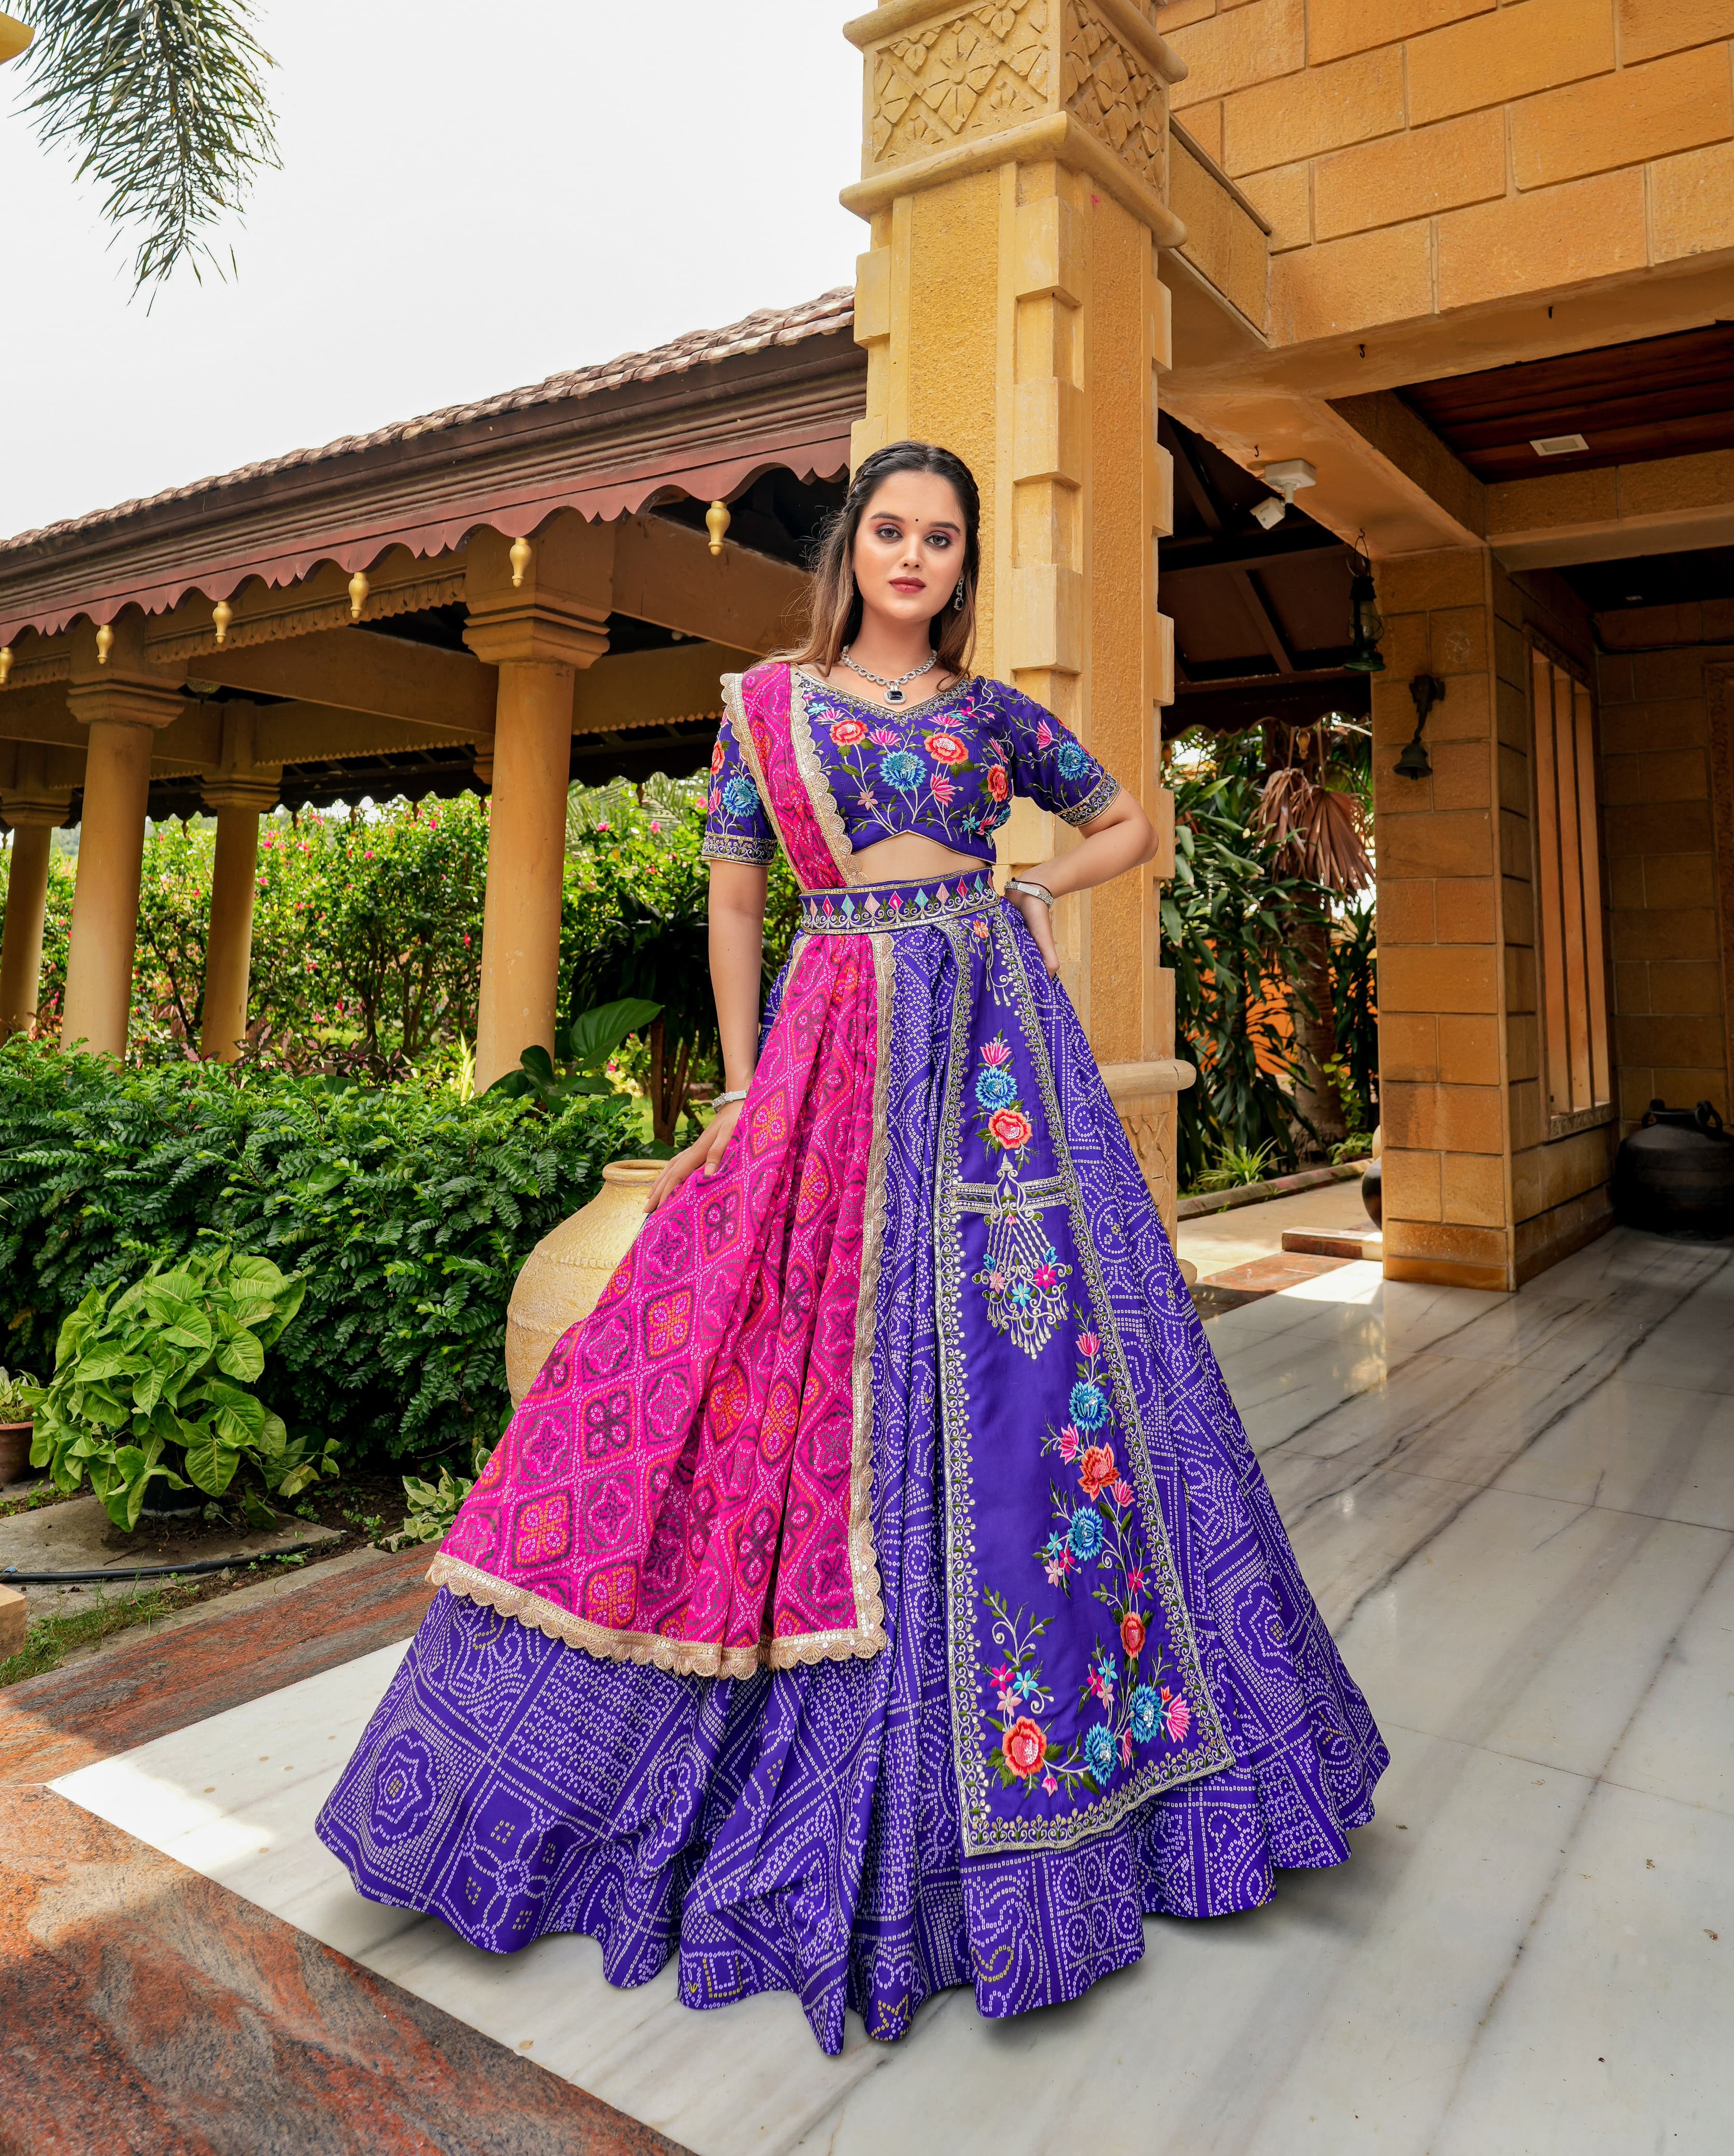 🌷Bandhani Lehenga choli🌷* Steal Everyone's Heart And Attention By Wearing  This Amazing *Bandhani Printed* Lehenga. Women Can Wear This… | Instagram